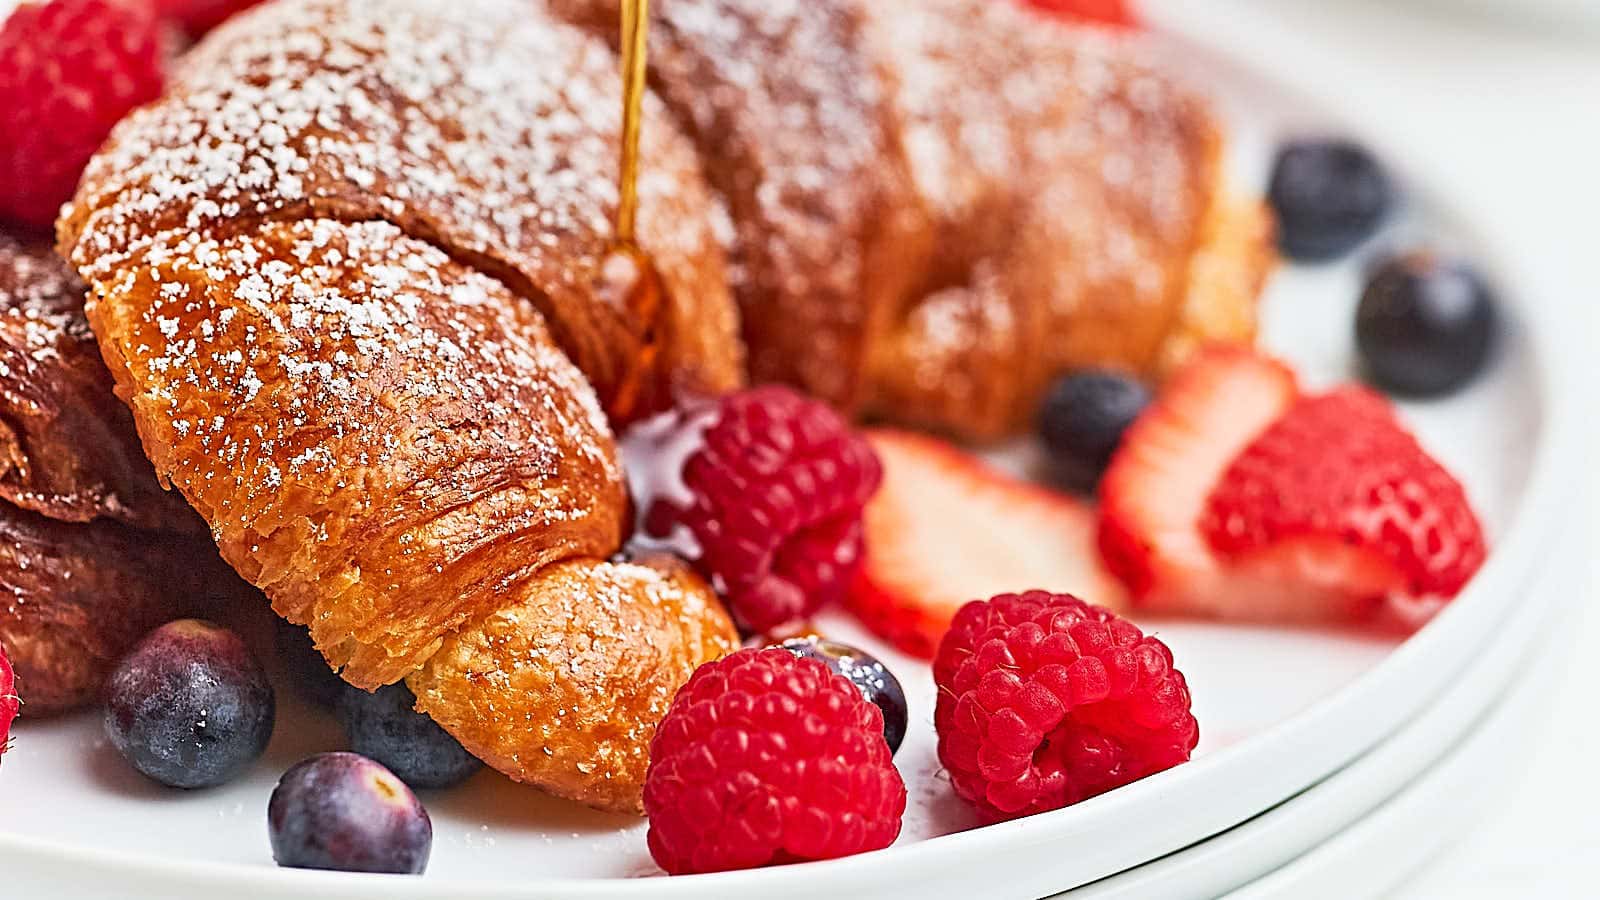 Croissant French Toast recipe by Cheerful Cook.